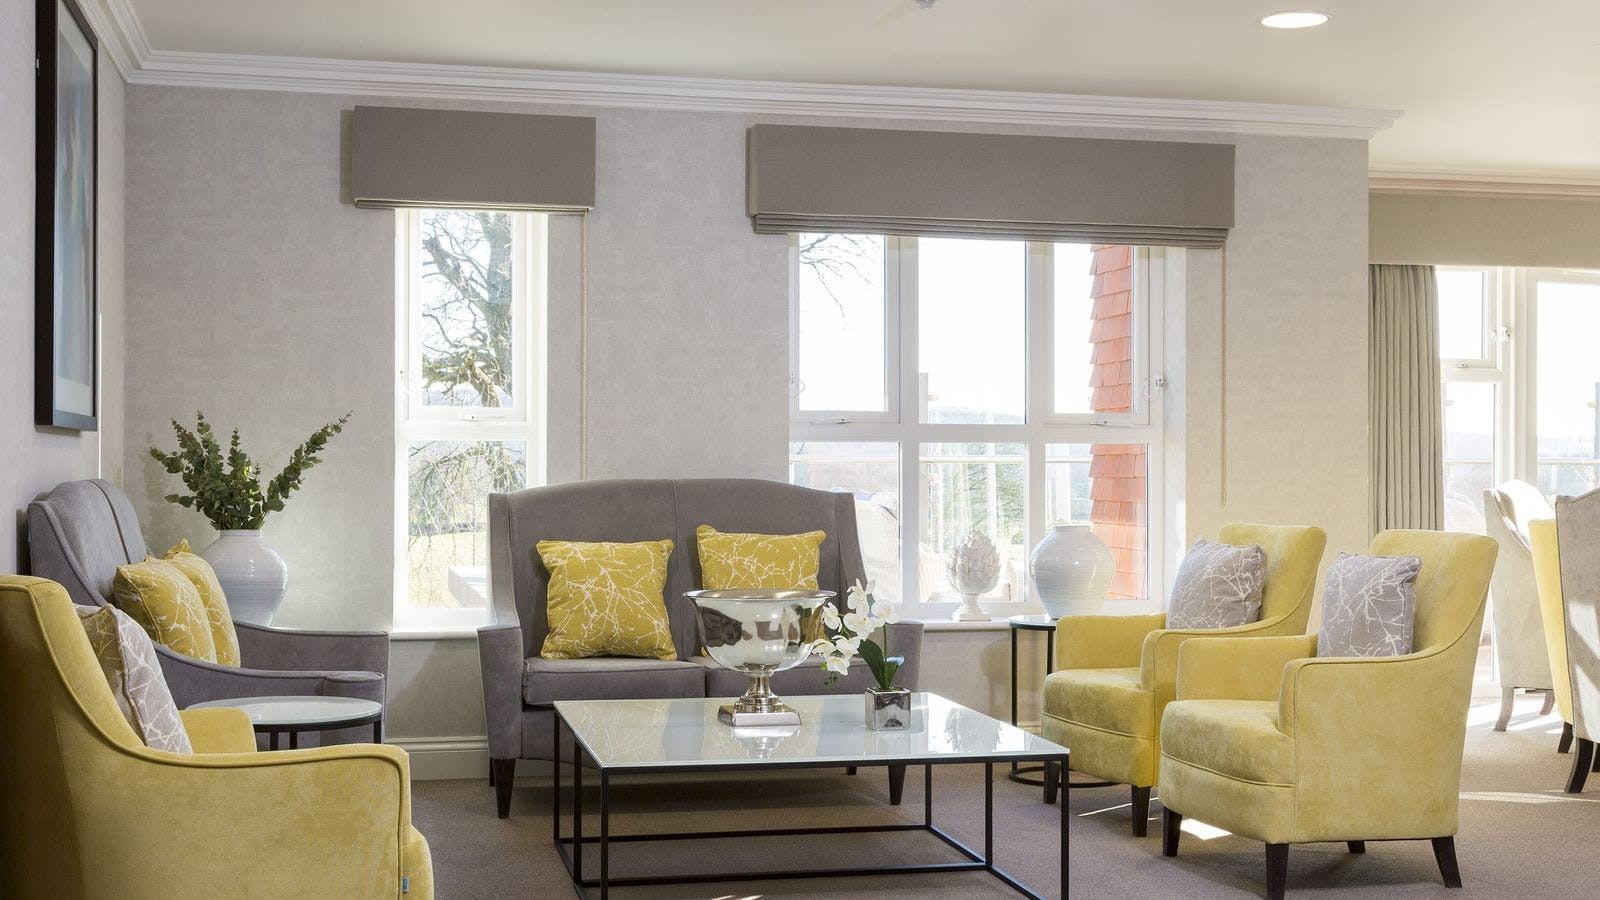 Communal Lounge at Blenheim Court Care Home in Liss, East Hampshire